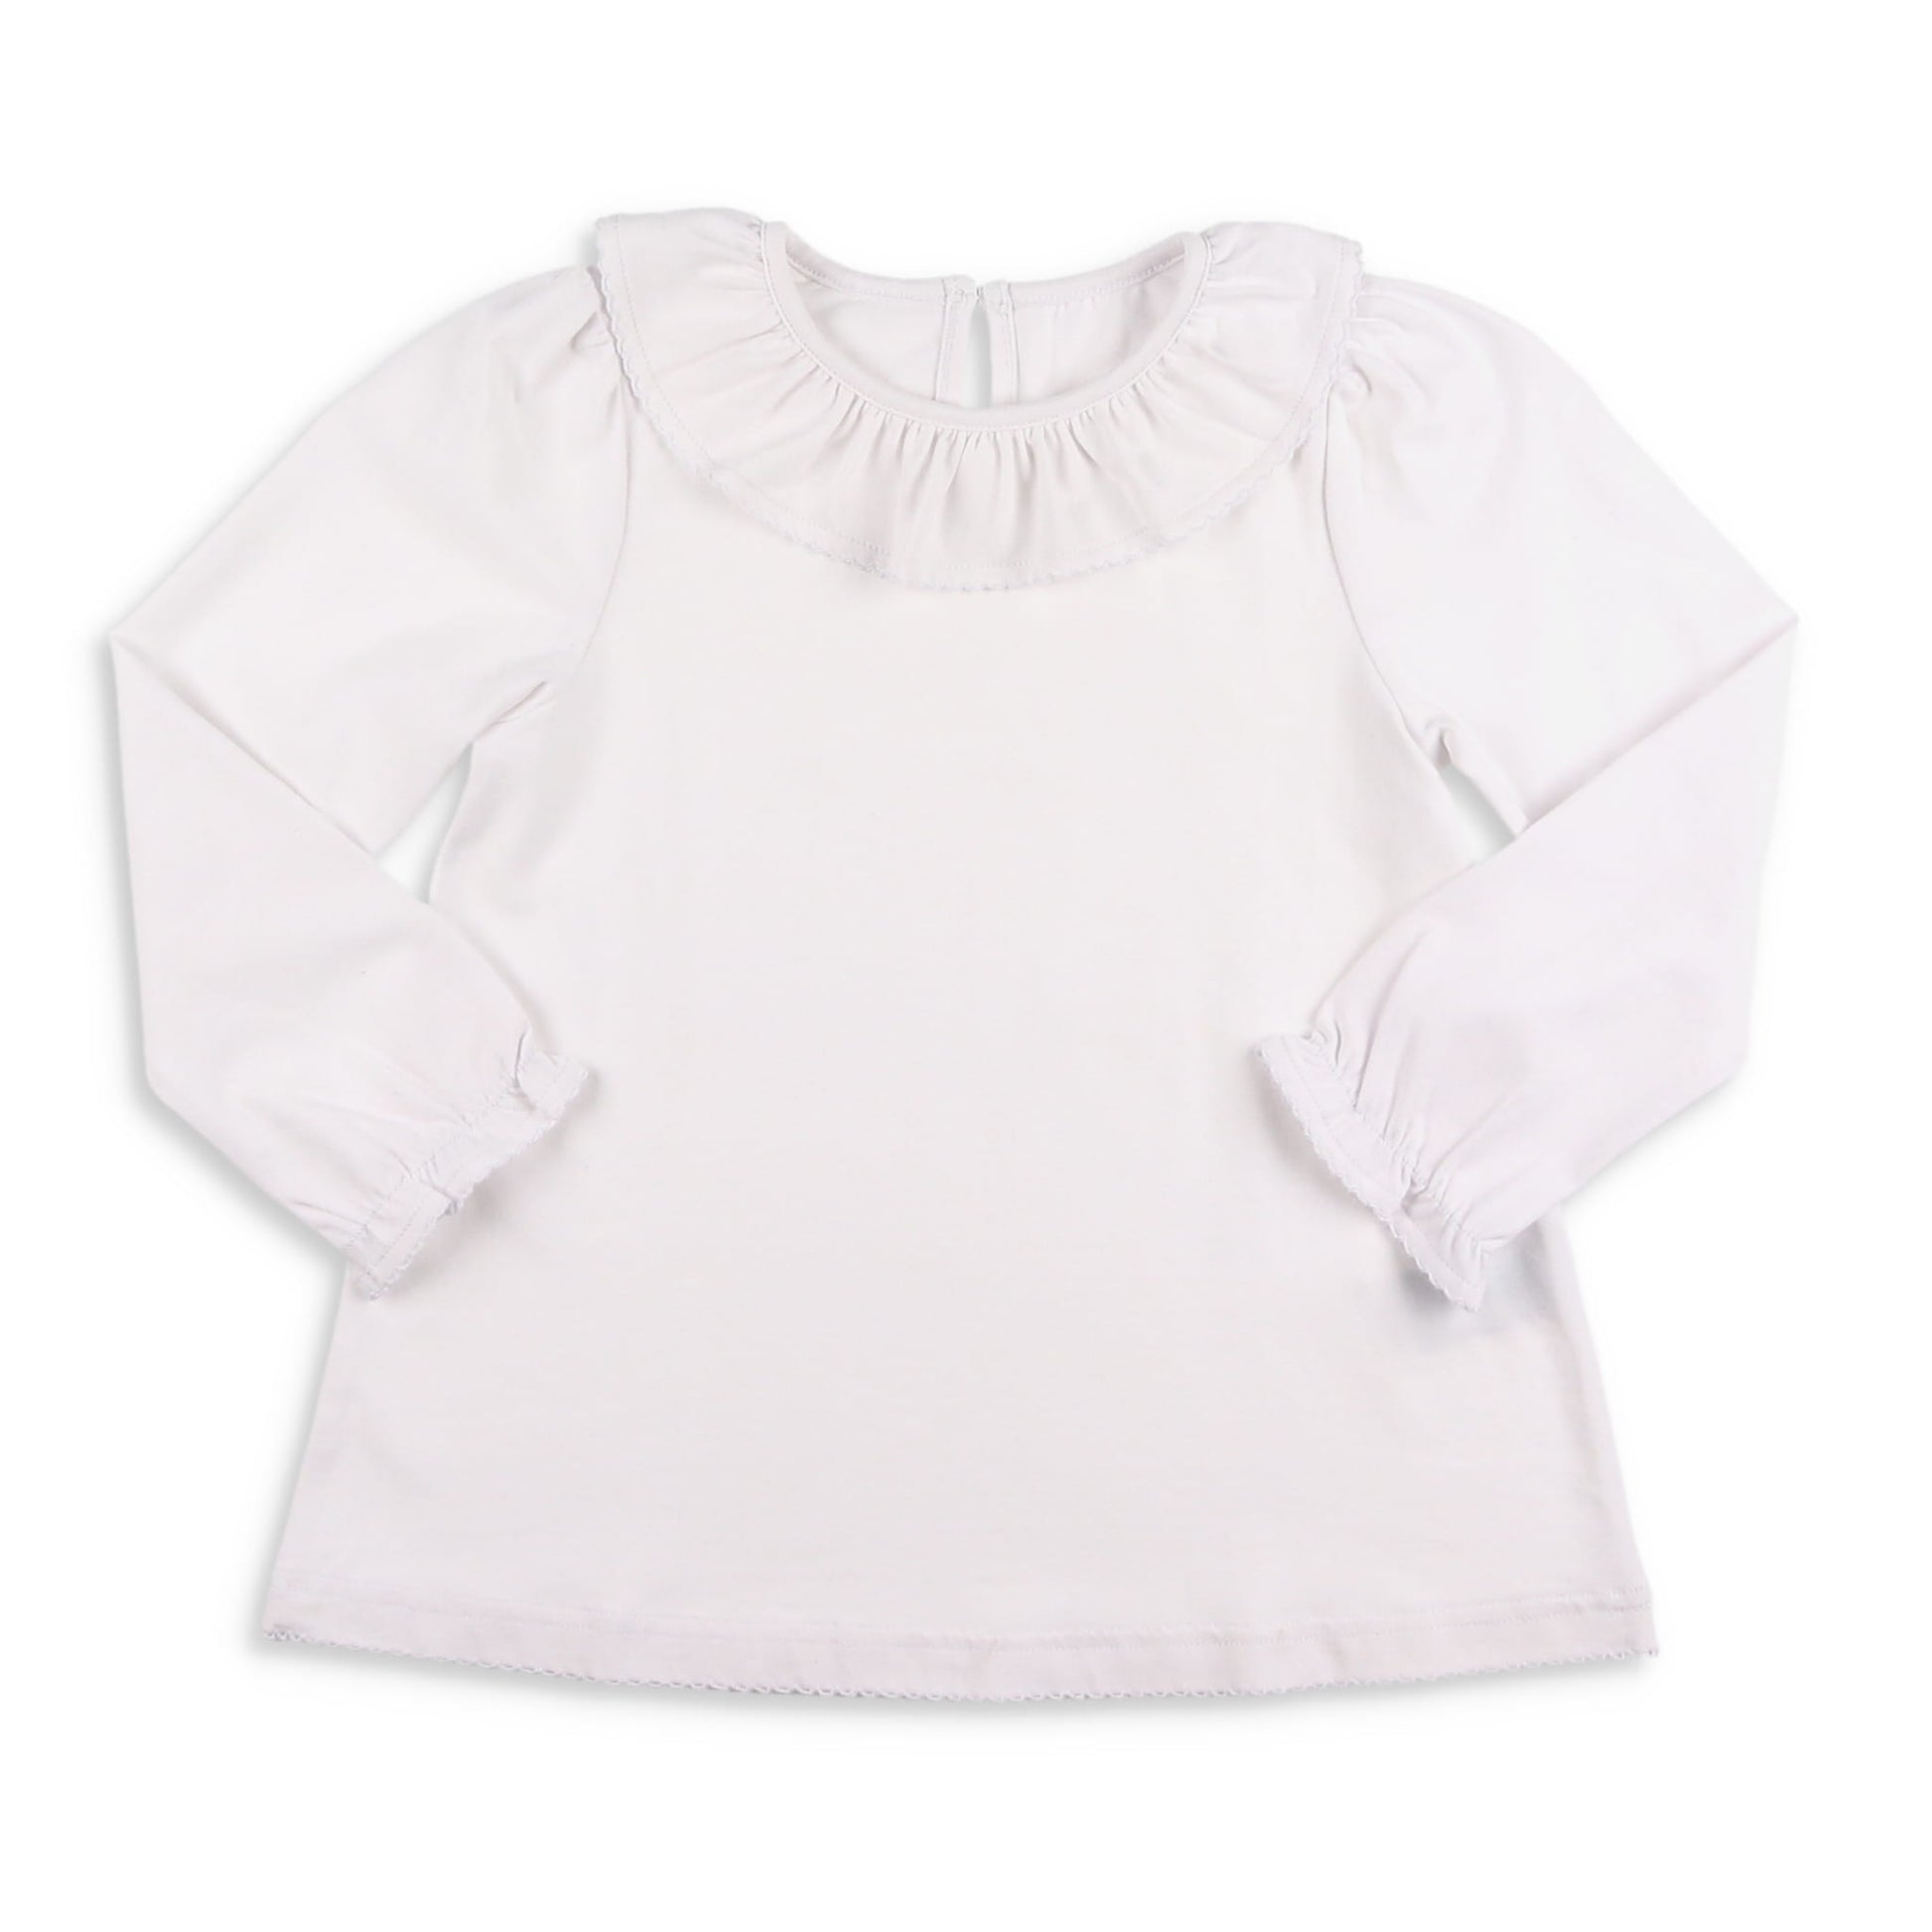 Long Grits Sleeve Girls Top Kids - and Neck Shrimp Ruffle